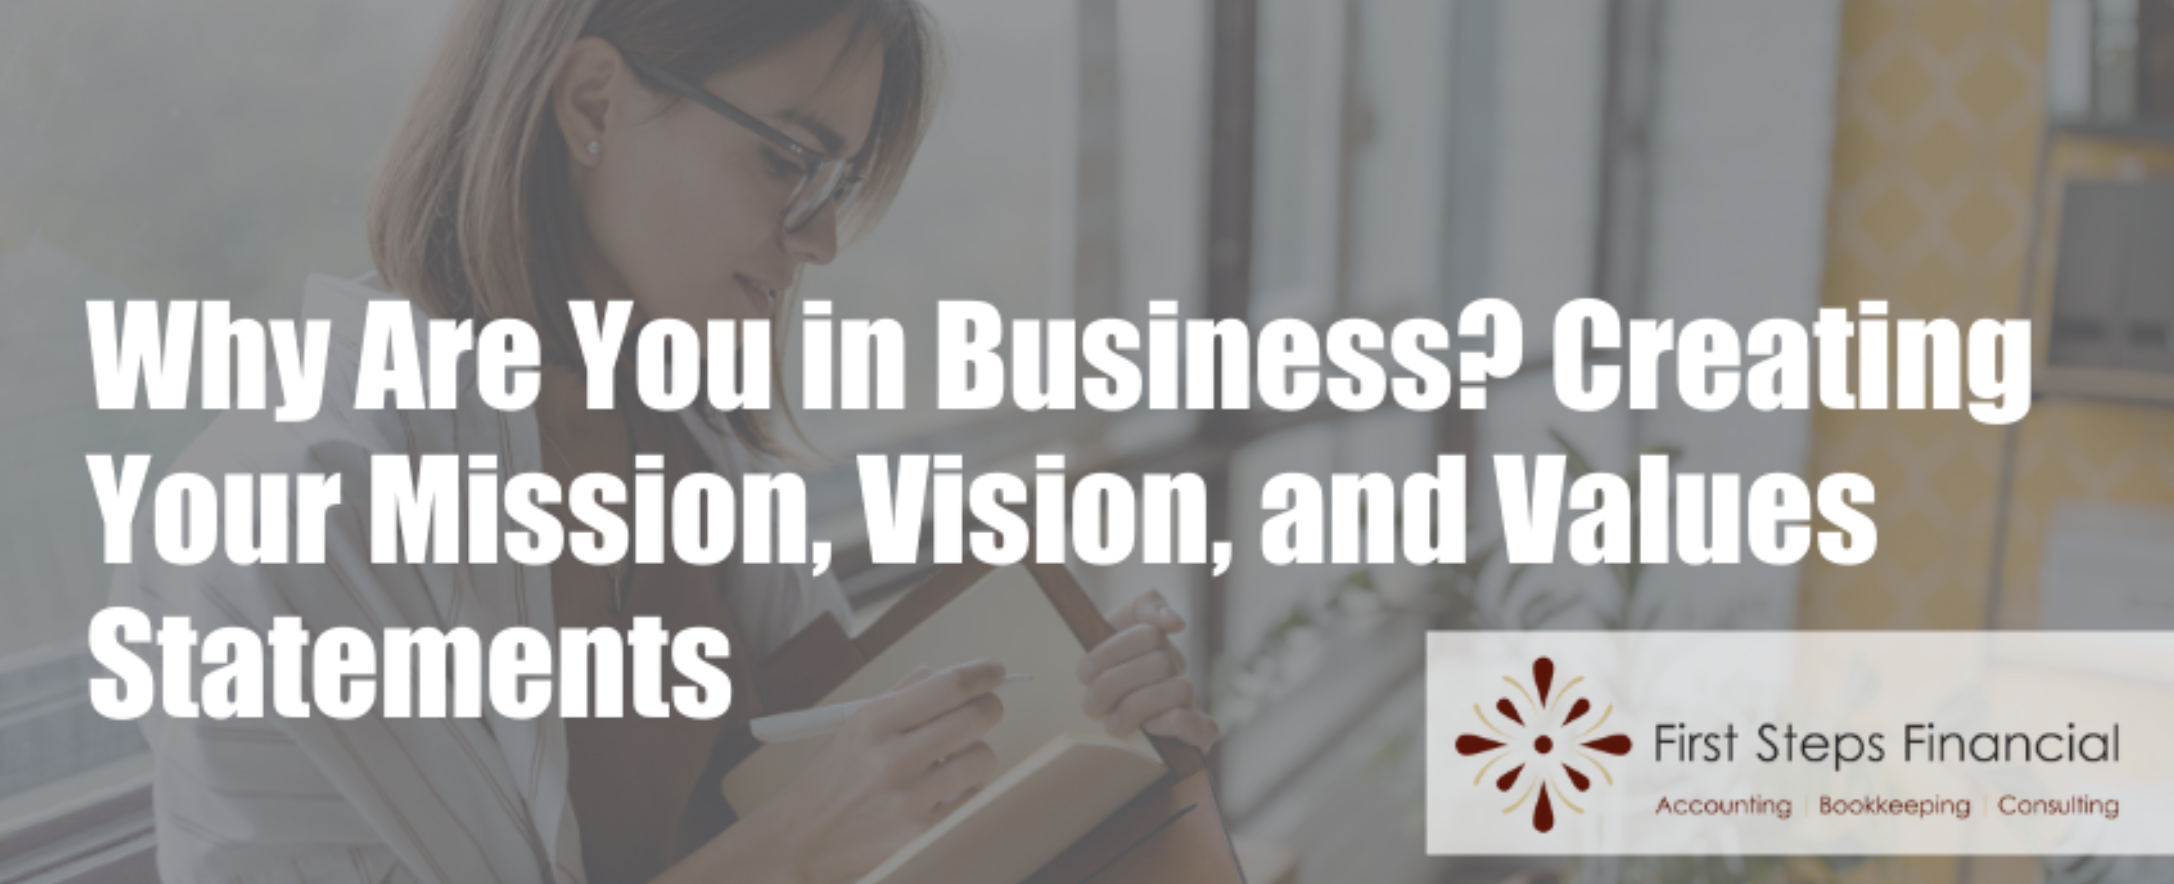 Why Are You in Business? Creating Your Mission, Vision, and Values Statements